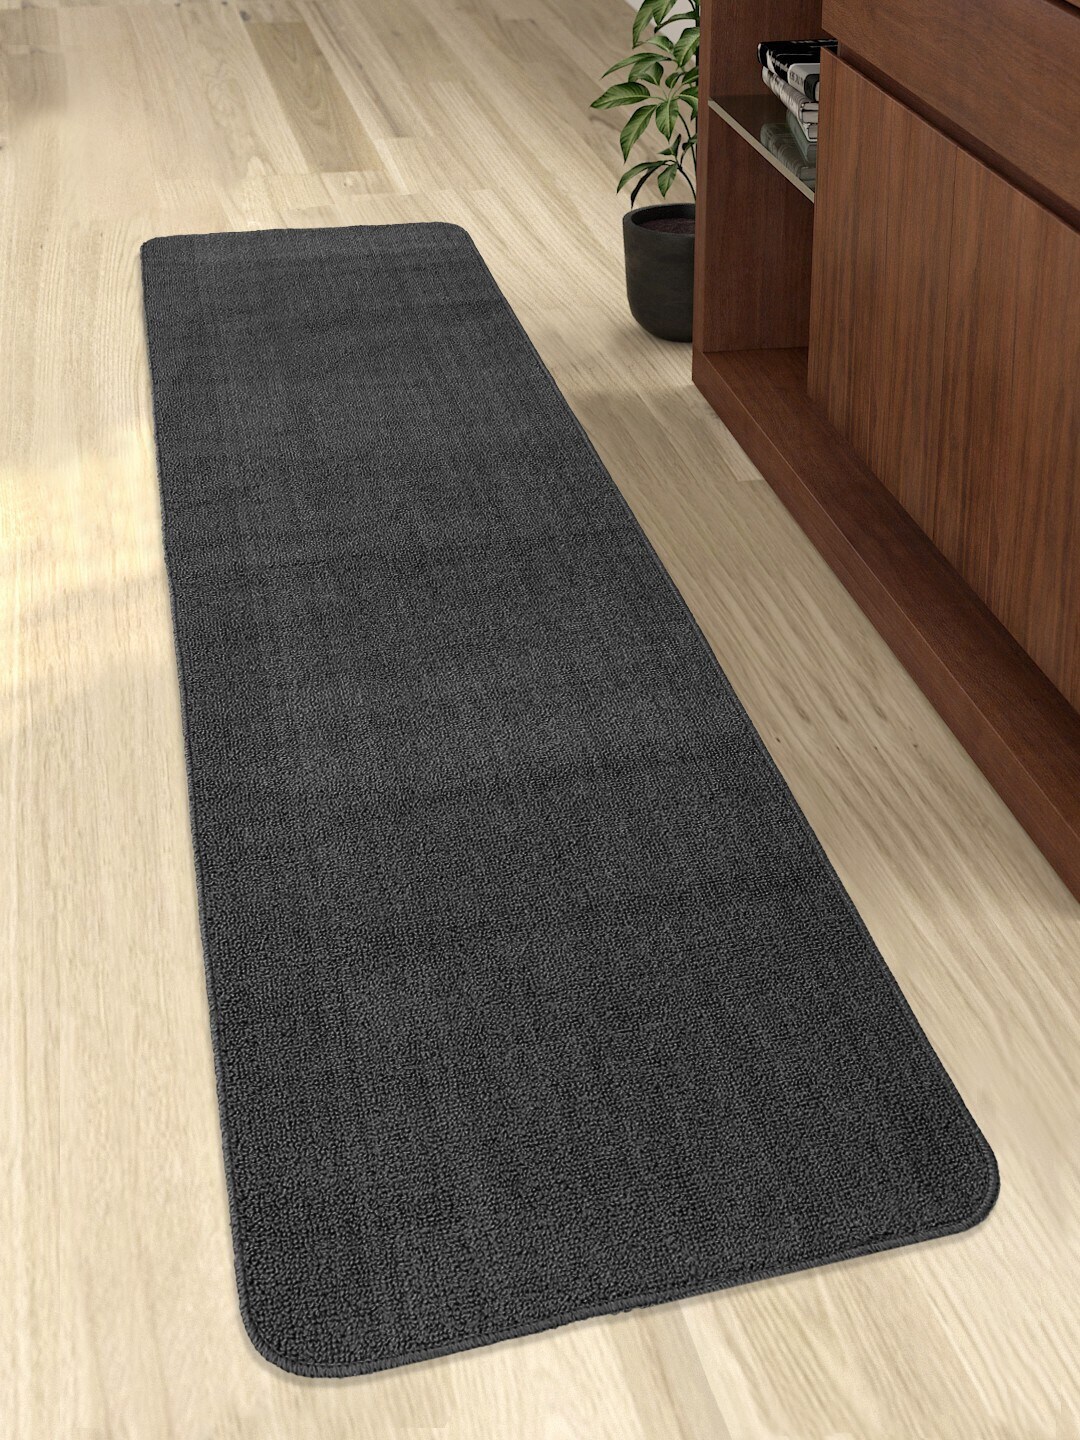 Saral Home Charcoal Grey Solid Polypropylene Anti-Slip Floor Runner Price in India